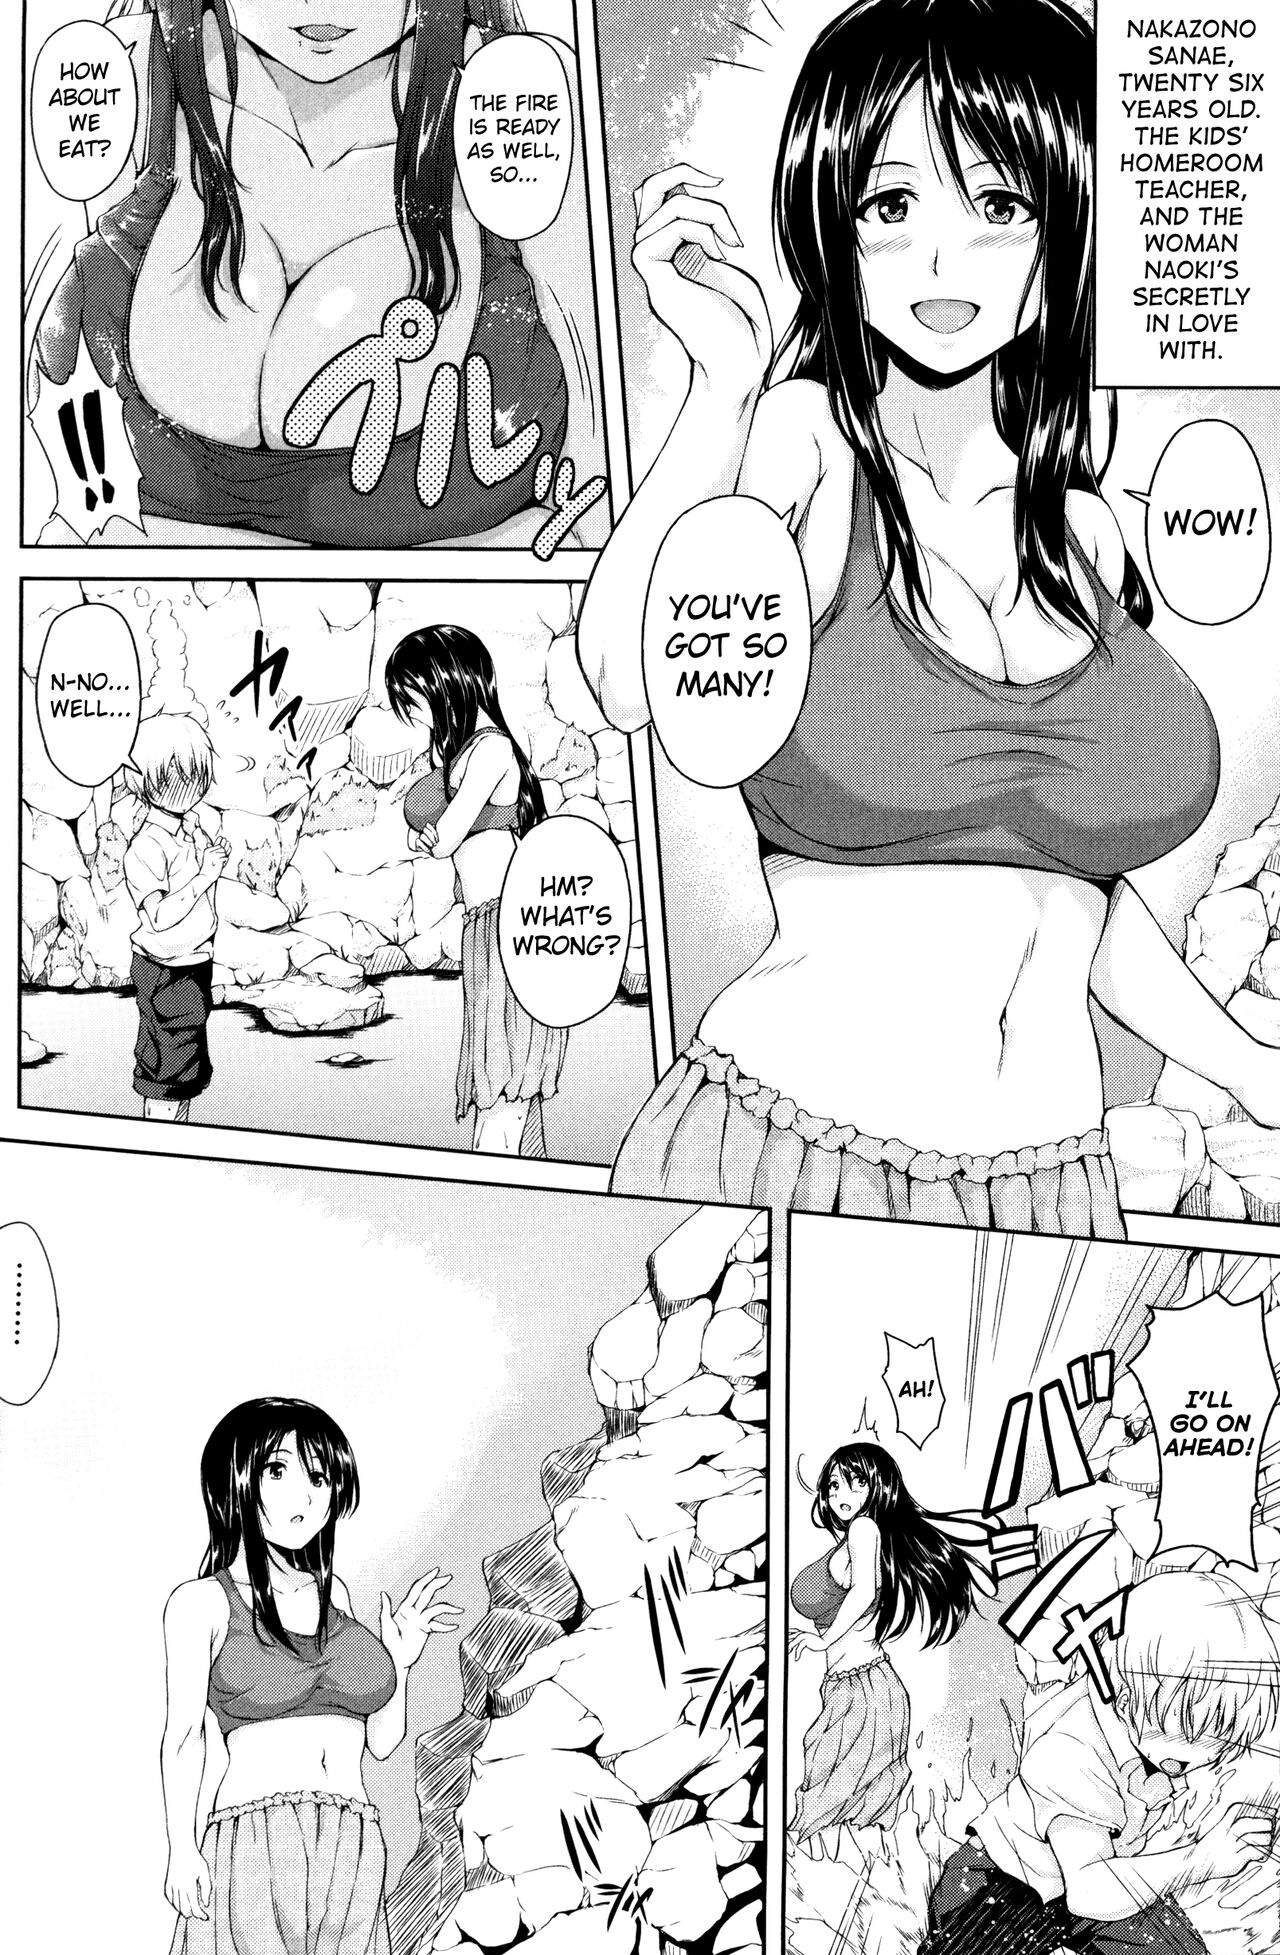 Boy Meets Harem - Page 12 - HentaiEra